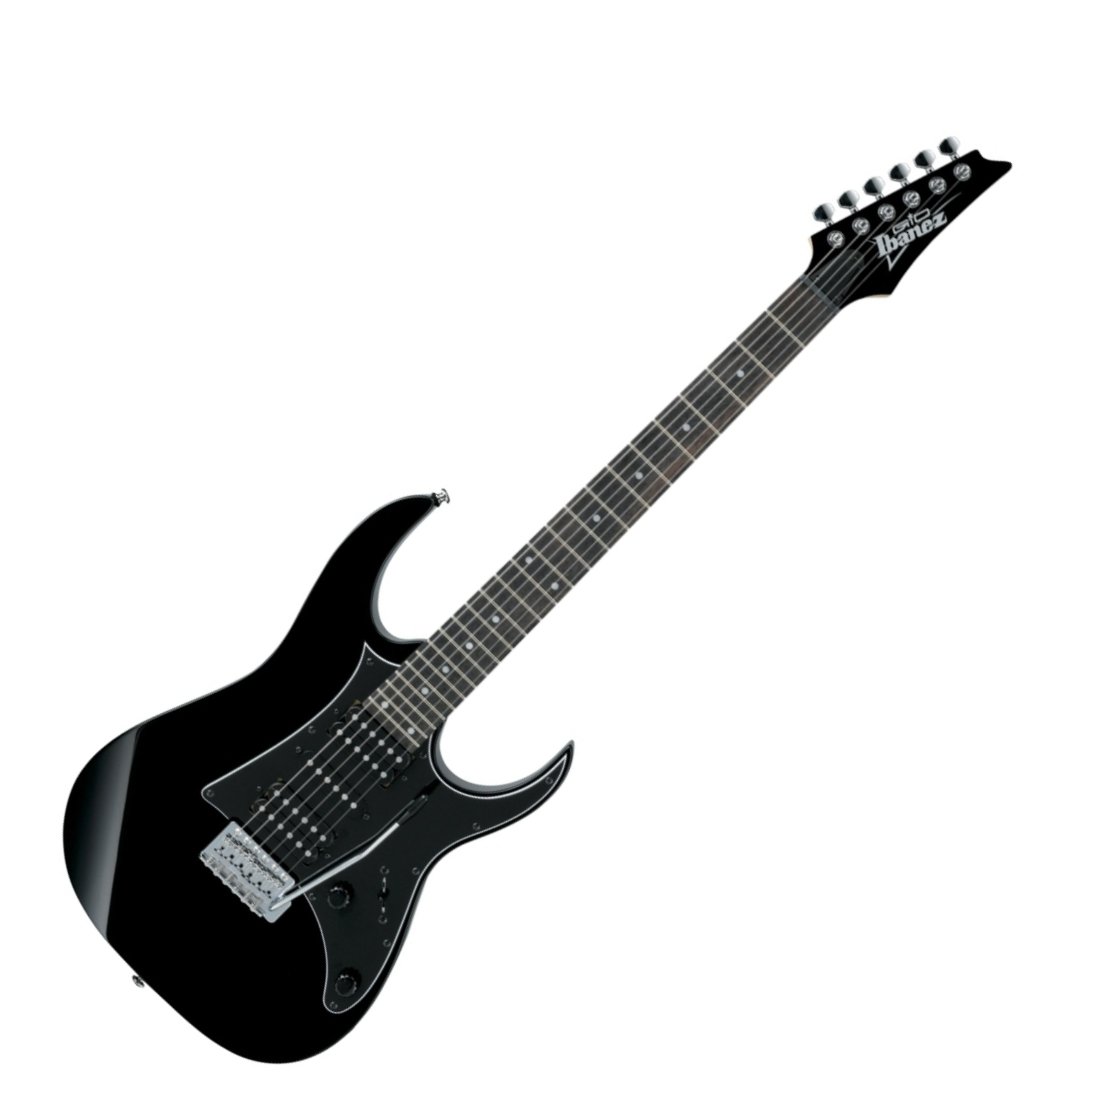 Ibanez GRG150 GiO Electric Guitar at zZounds